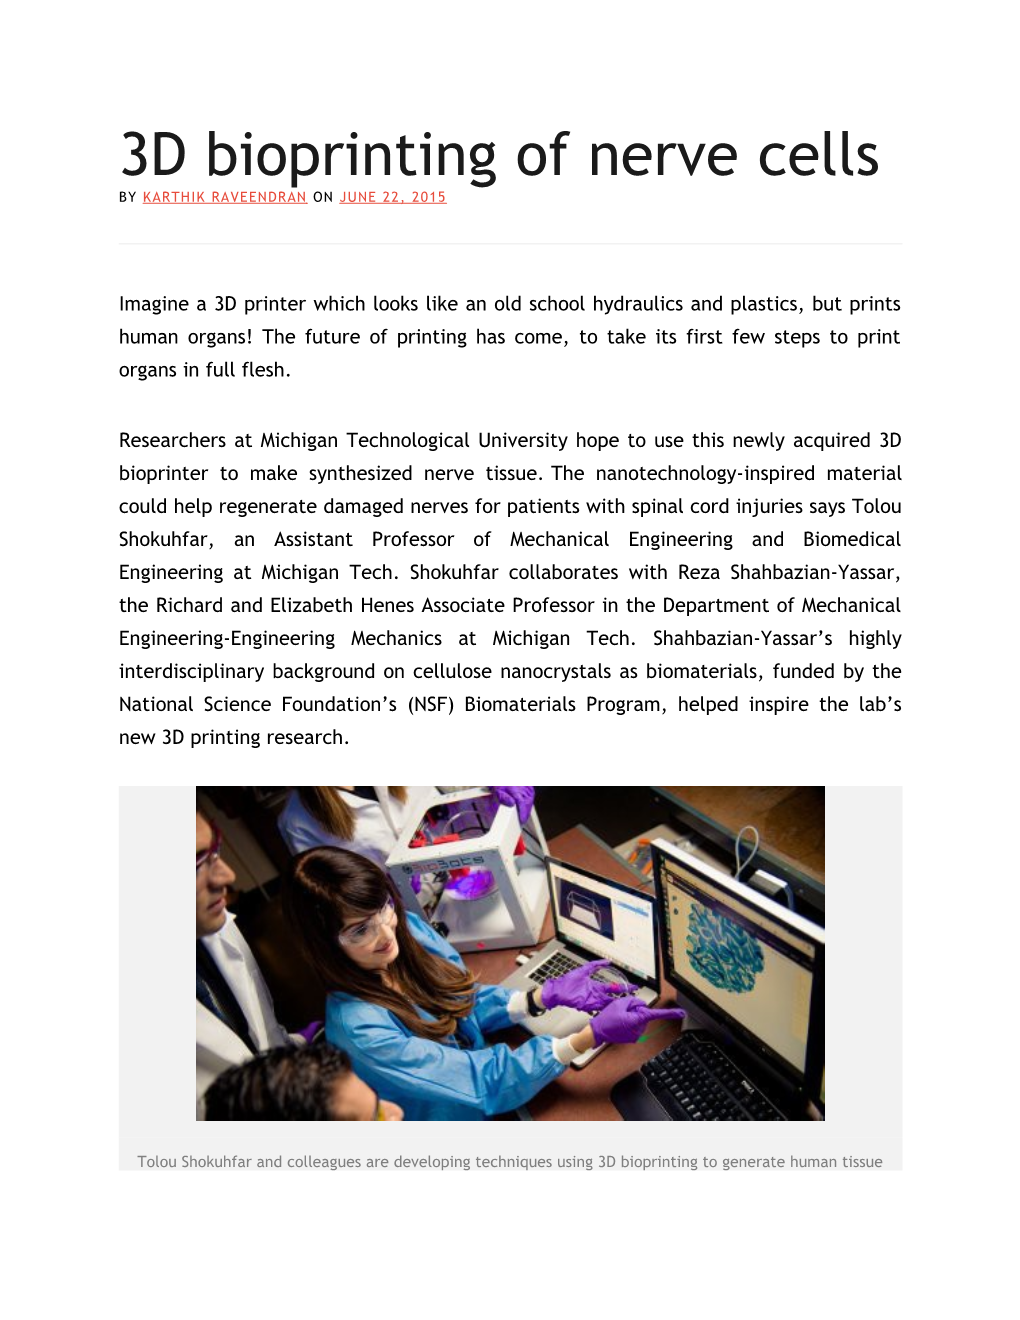 3D Bioprinting of Nervecells